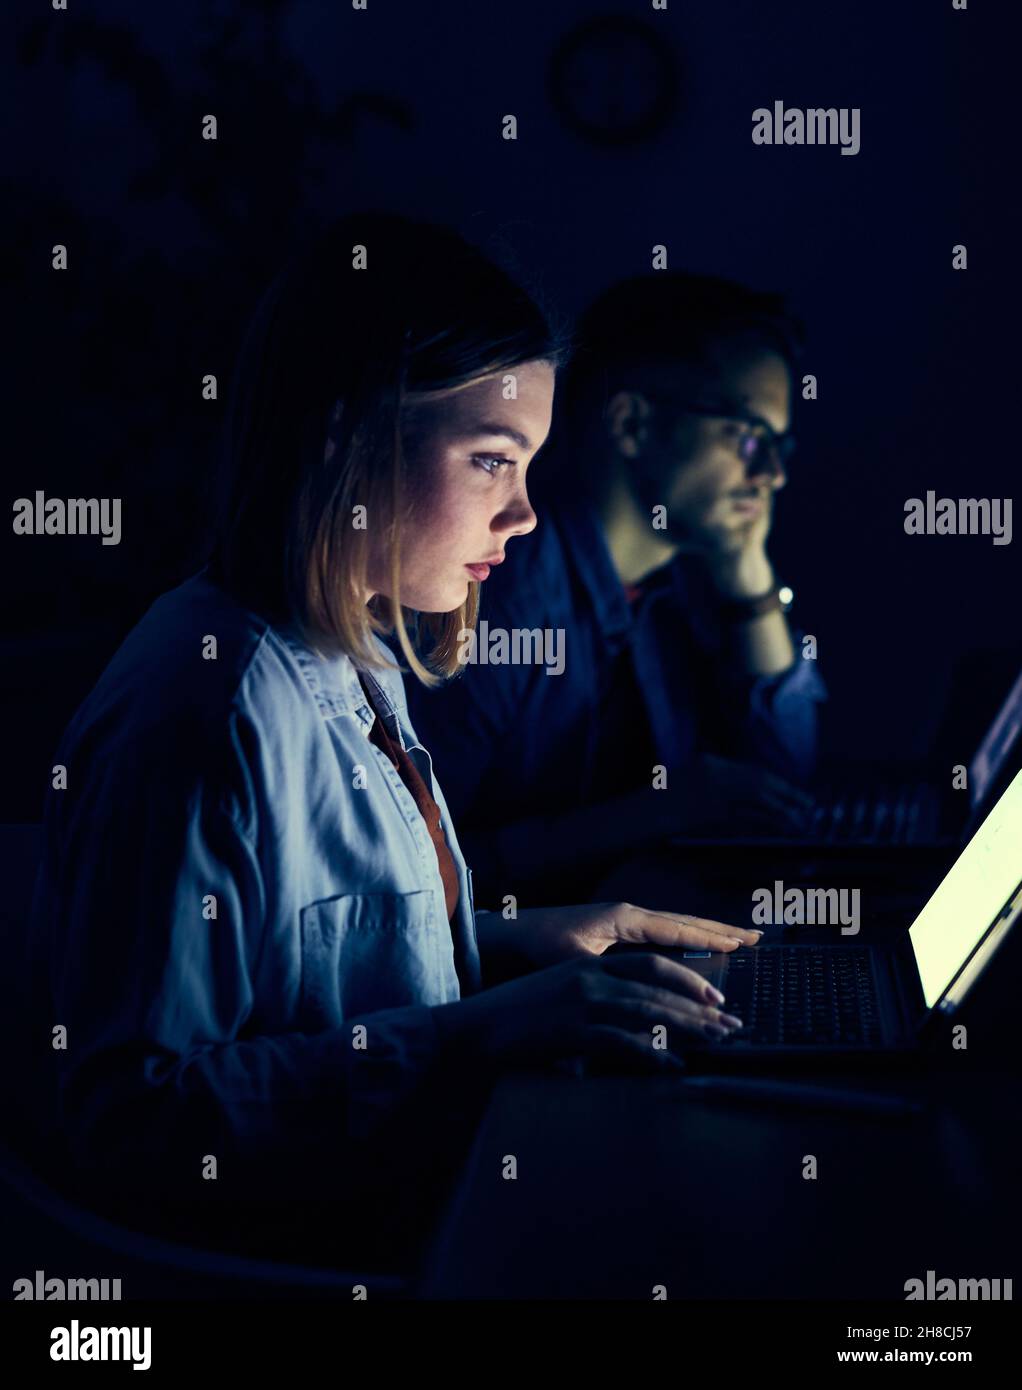 laptop computer, night dark looking office late working ciner crime theft Stock Photo